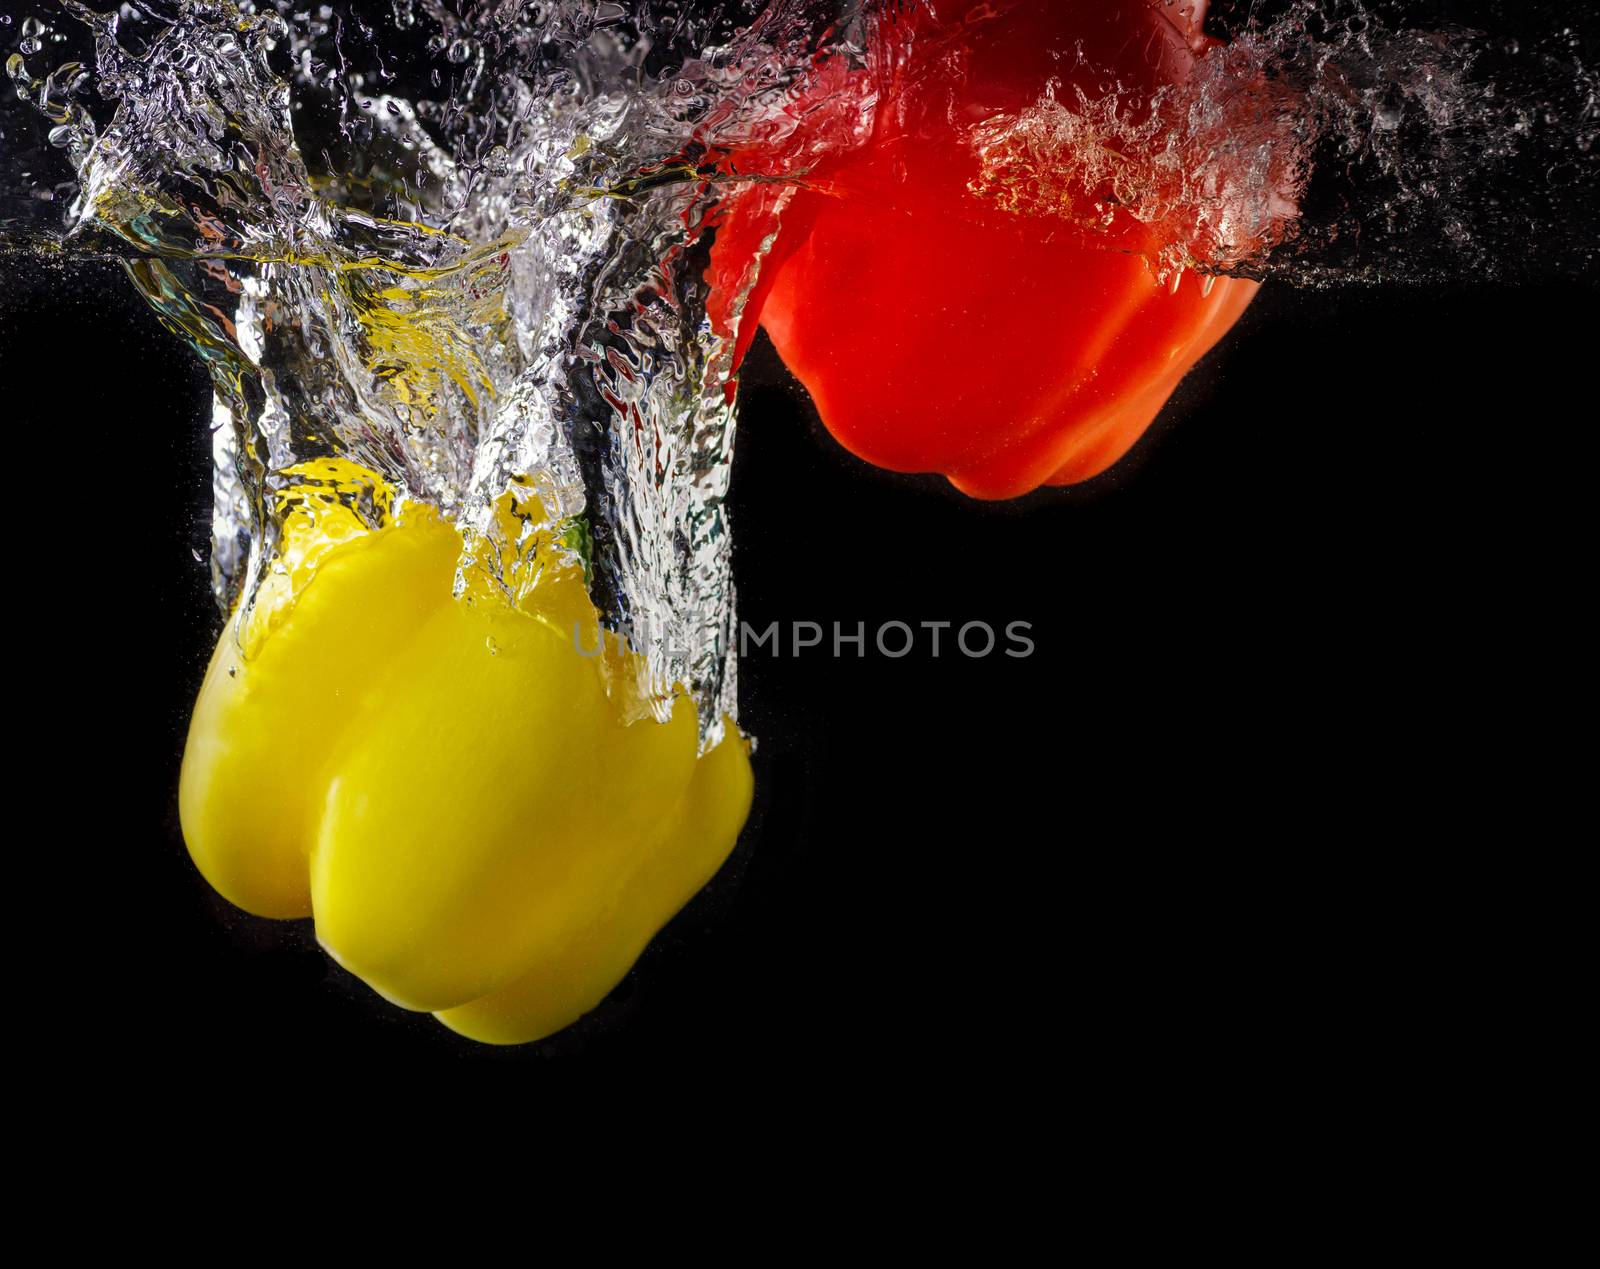 Vegetables tomato and paprika in water splash on black background